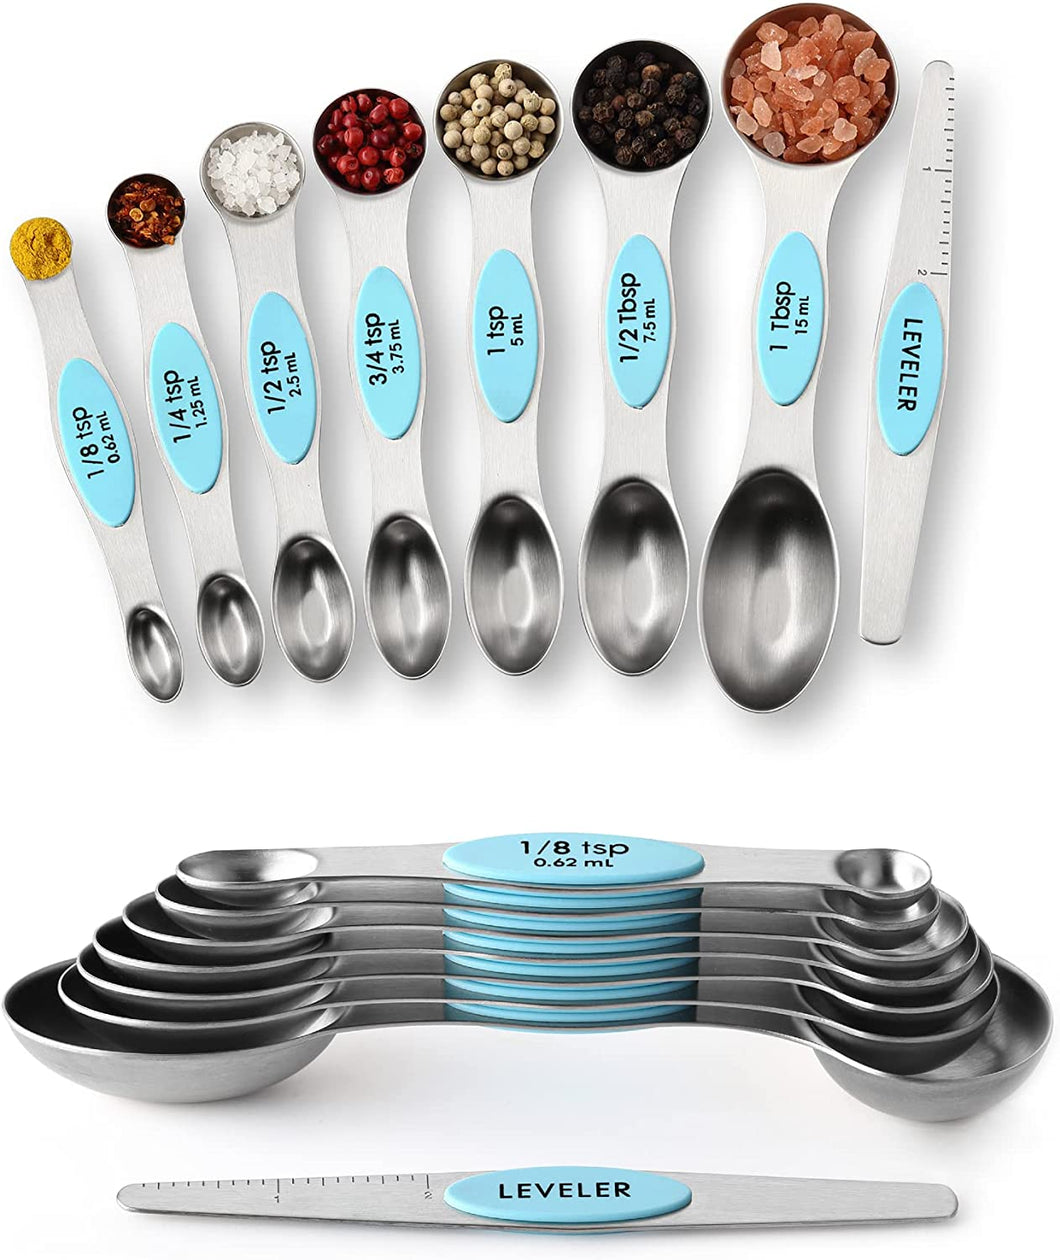 Spring Chef Magnetic Measuring Spoons Set with Strong N45 Magnets, Heavy  Duty Stainless Steel Metal, Fits in Most Kitchen Spice Jars for Baking 